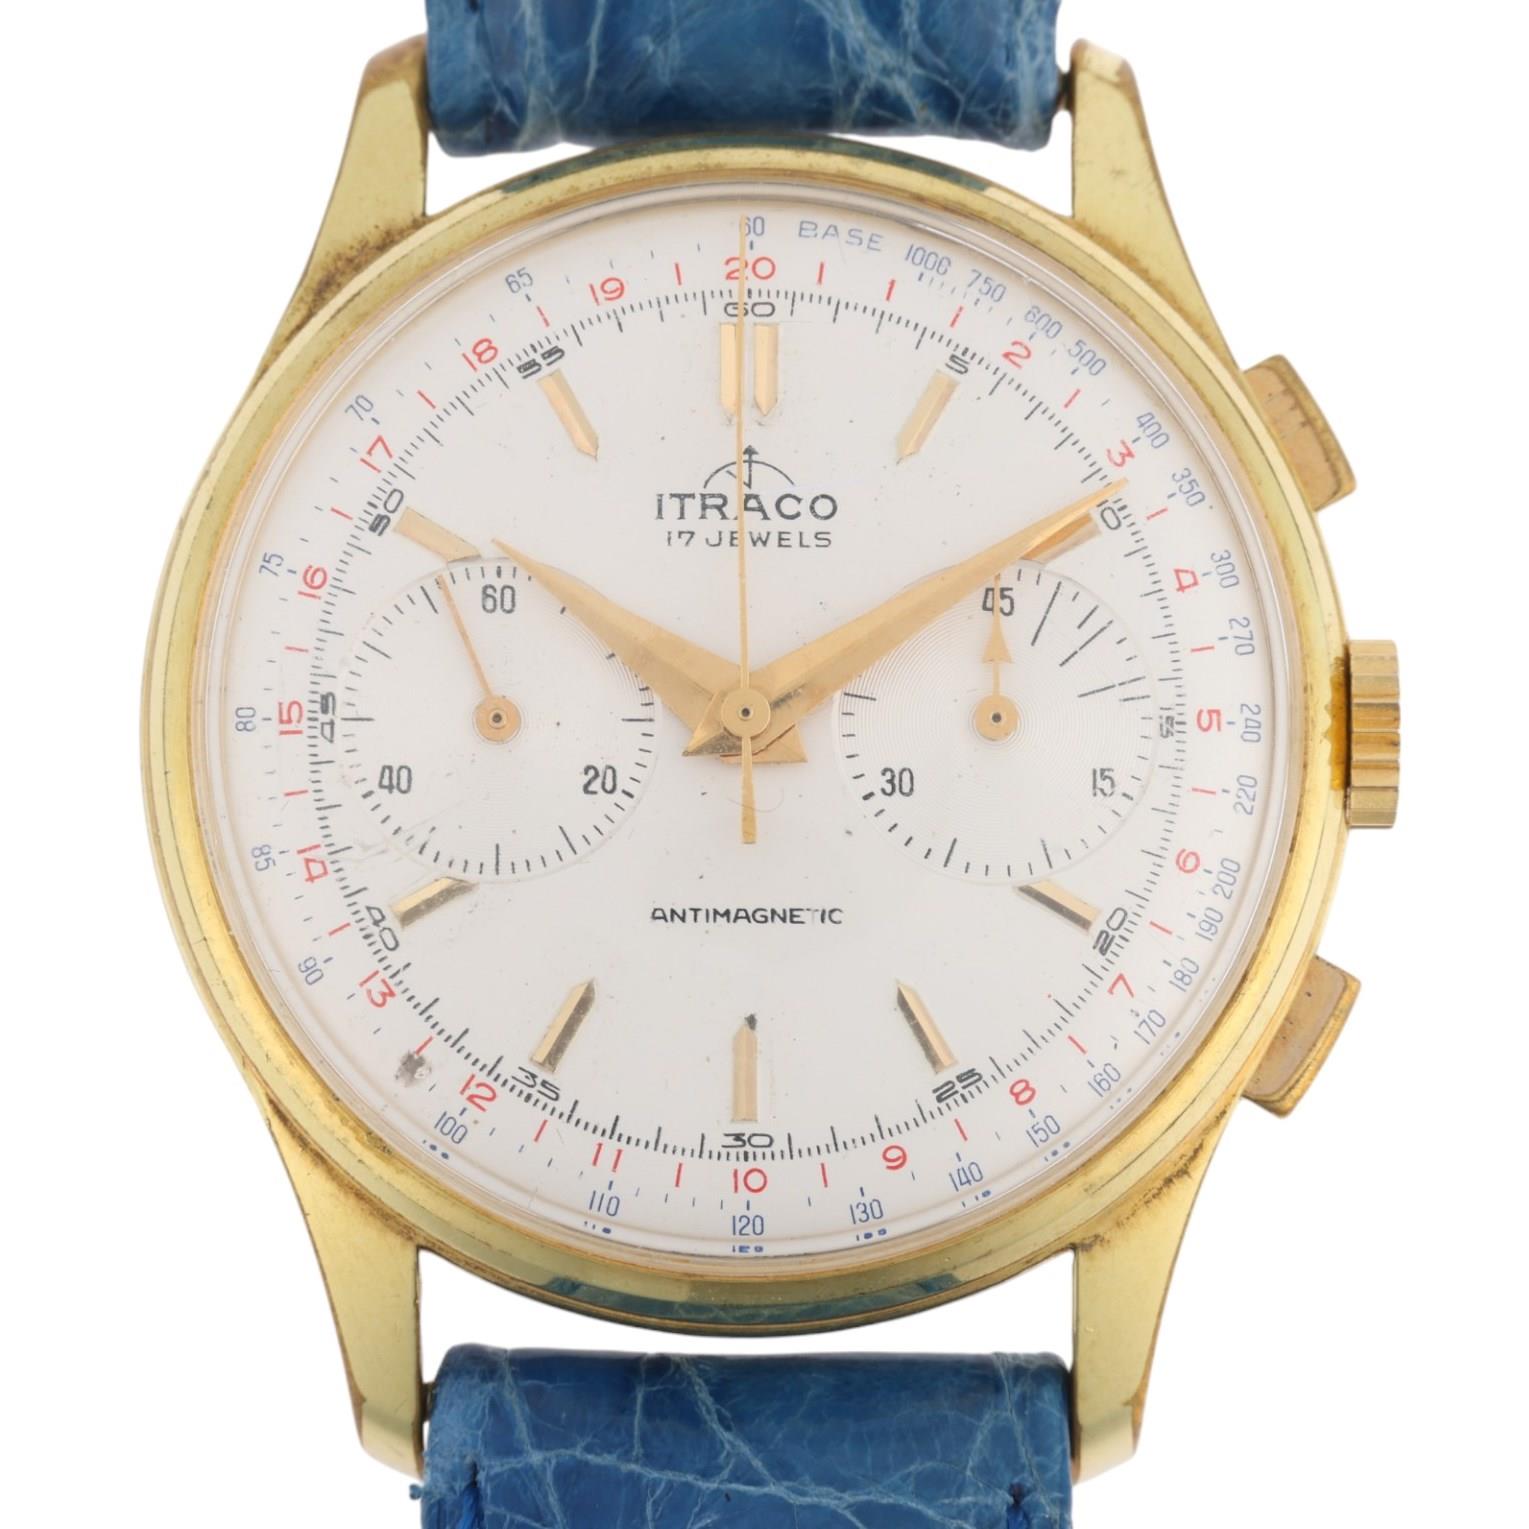 ITRACO - a Vintage gold plated stainless steel mechanical chronograph wristwatch, ref. 651, circa